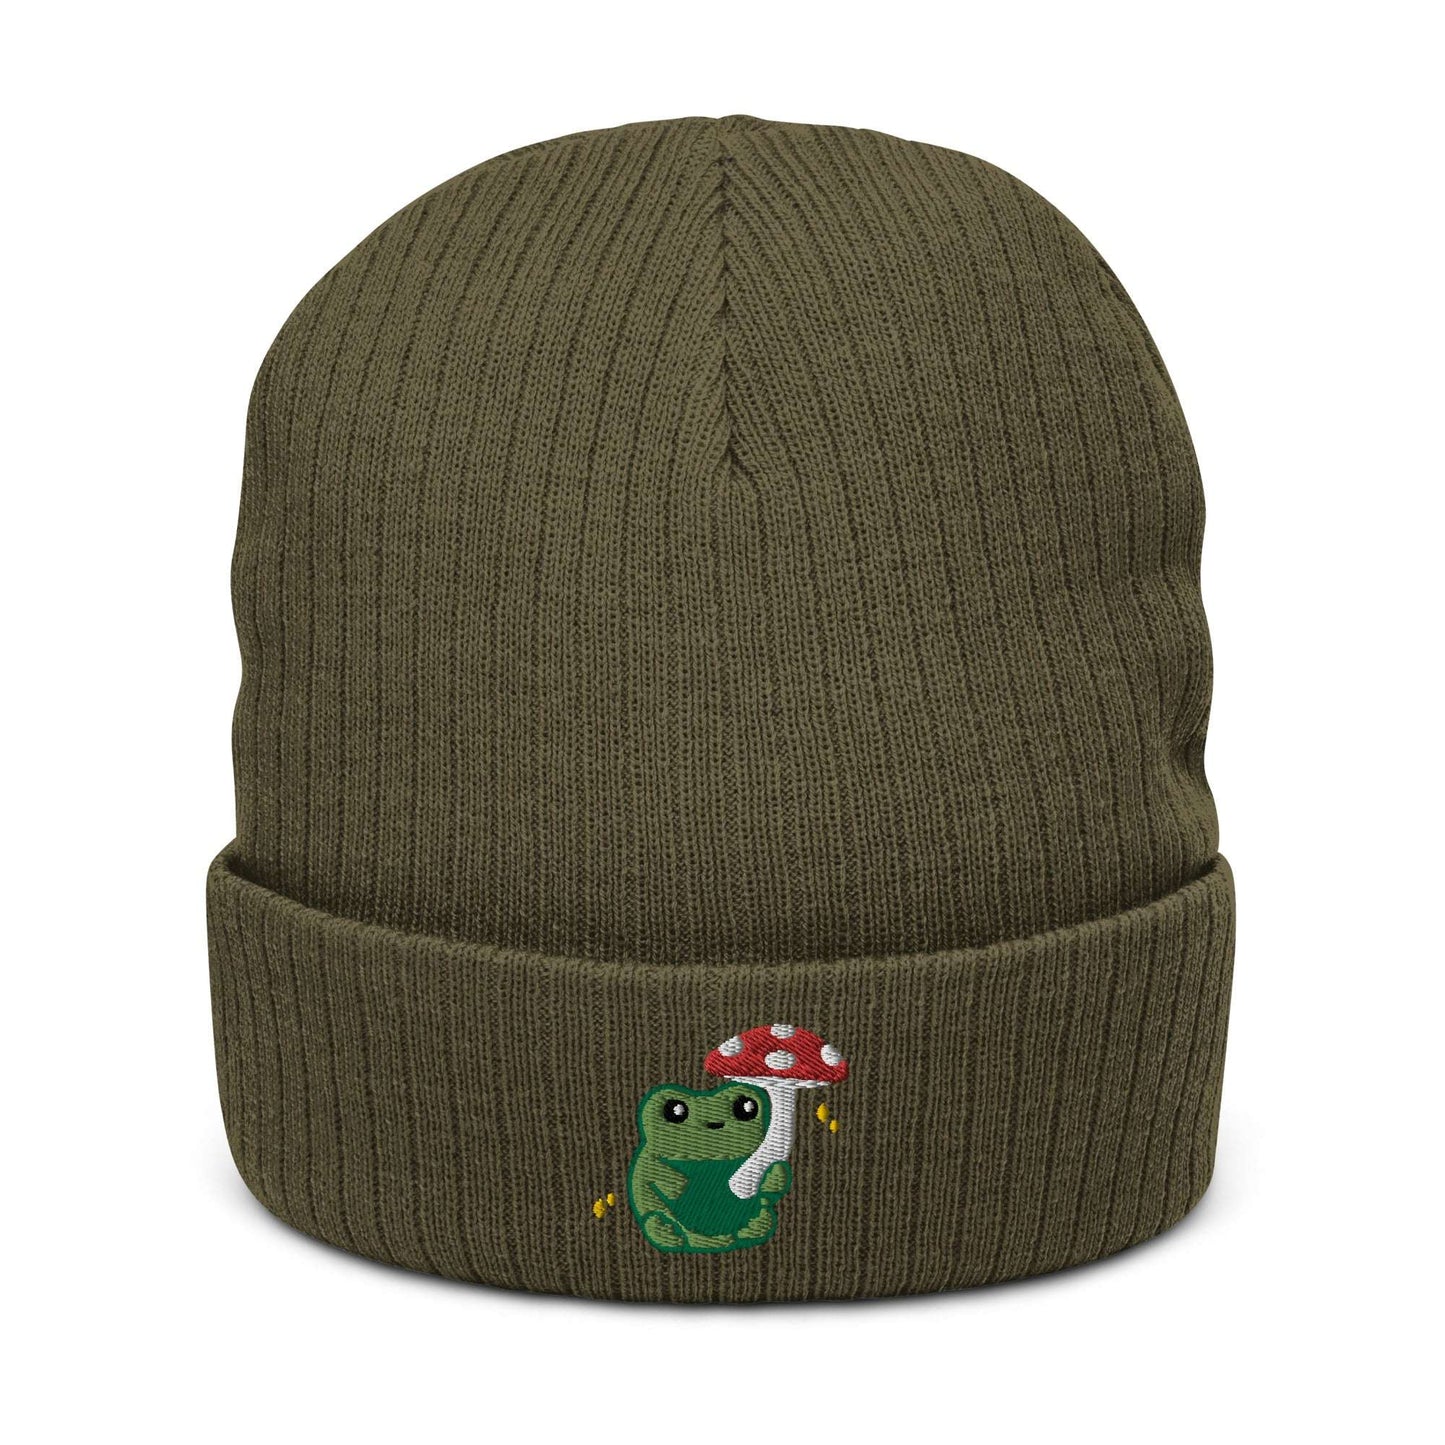 Ribbed Knit Beanie with Cute Embroidered Frog holding a Mushroom Umbrella: Olive